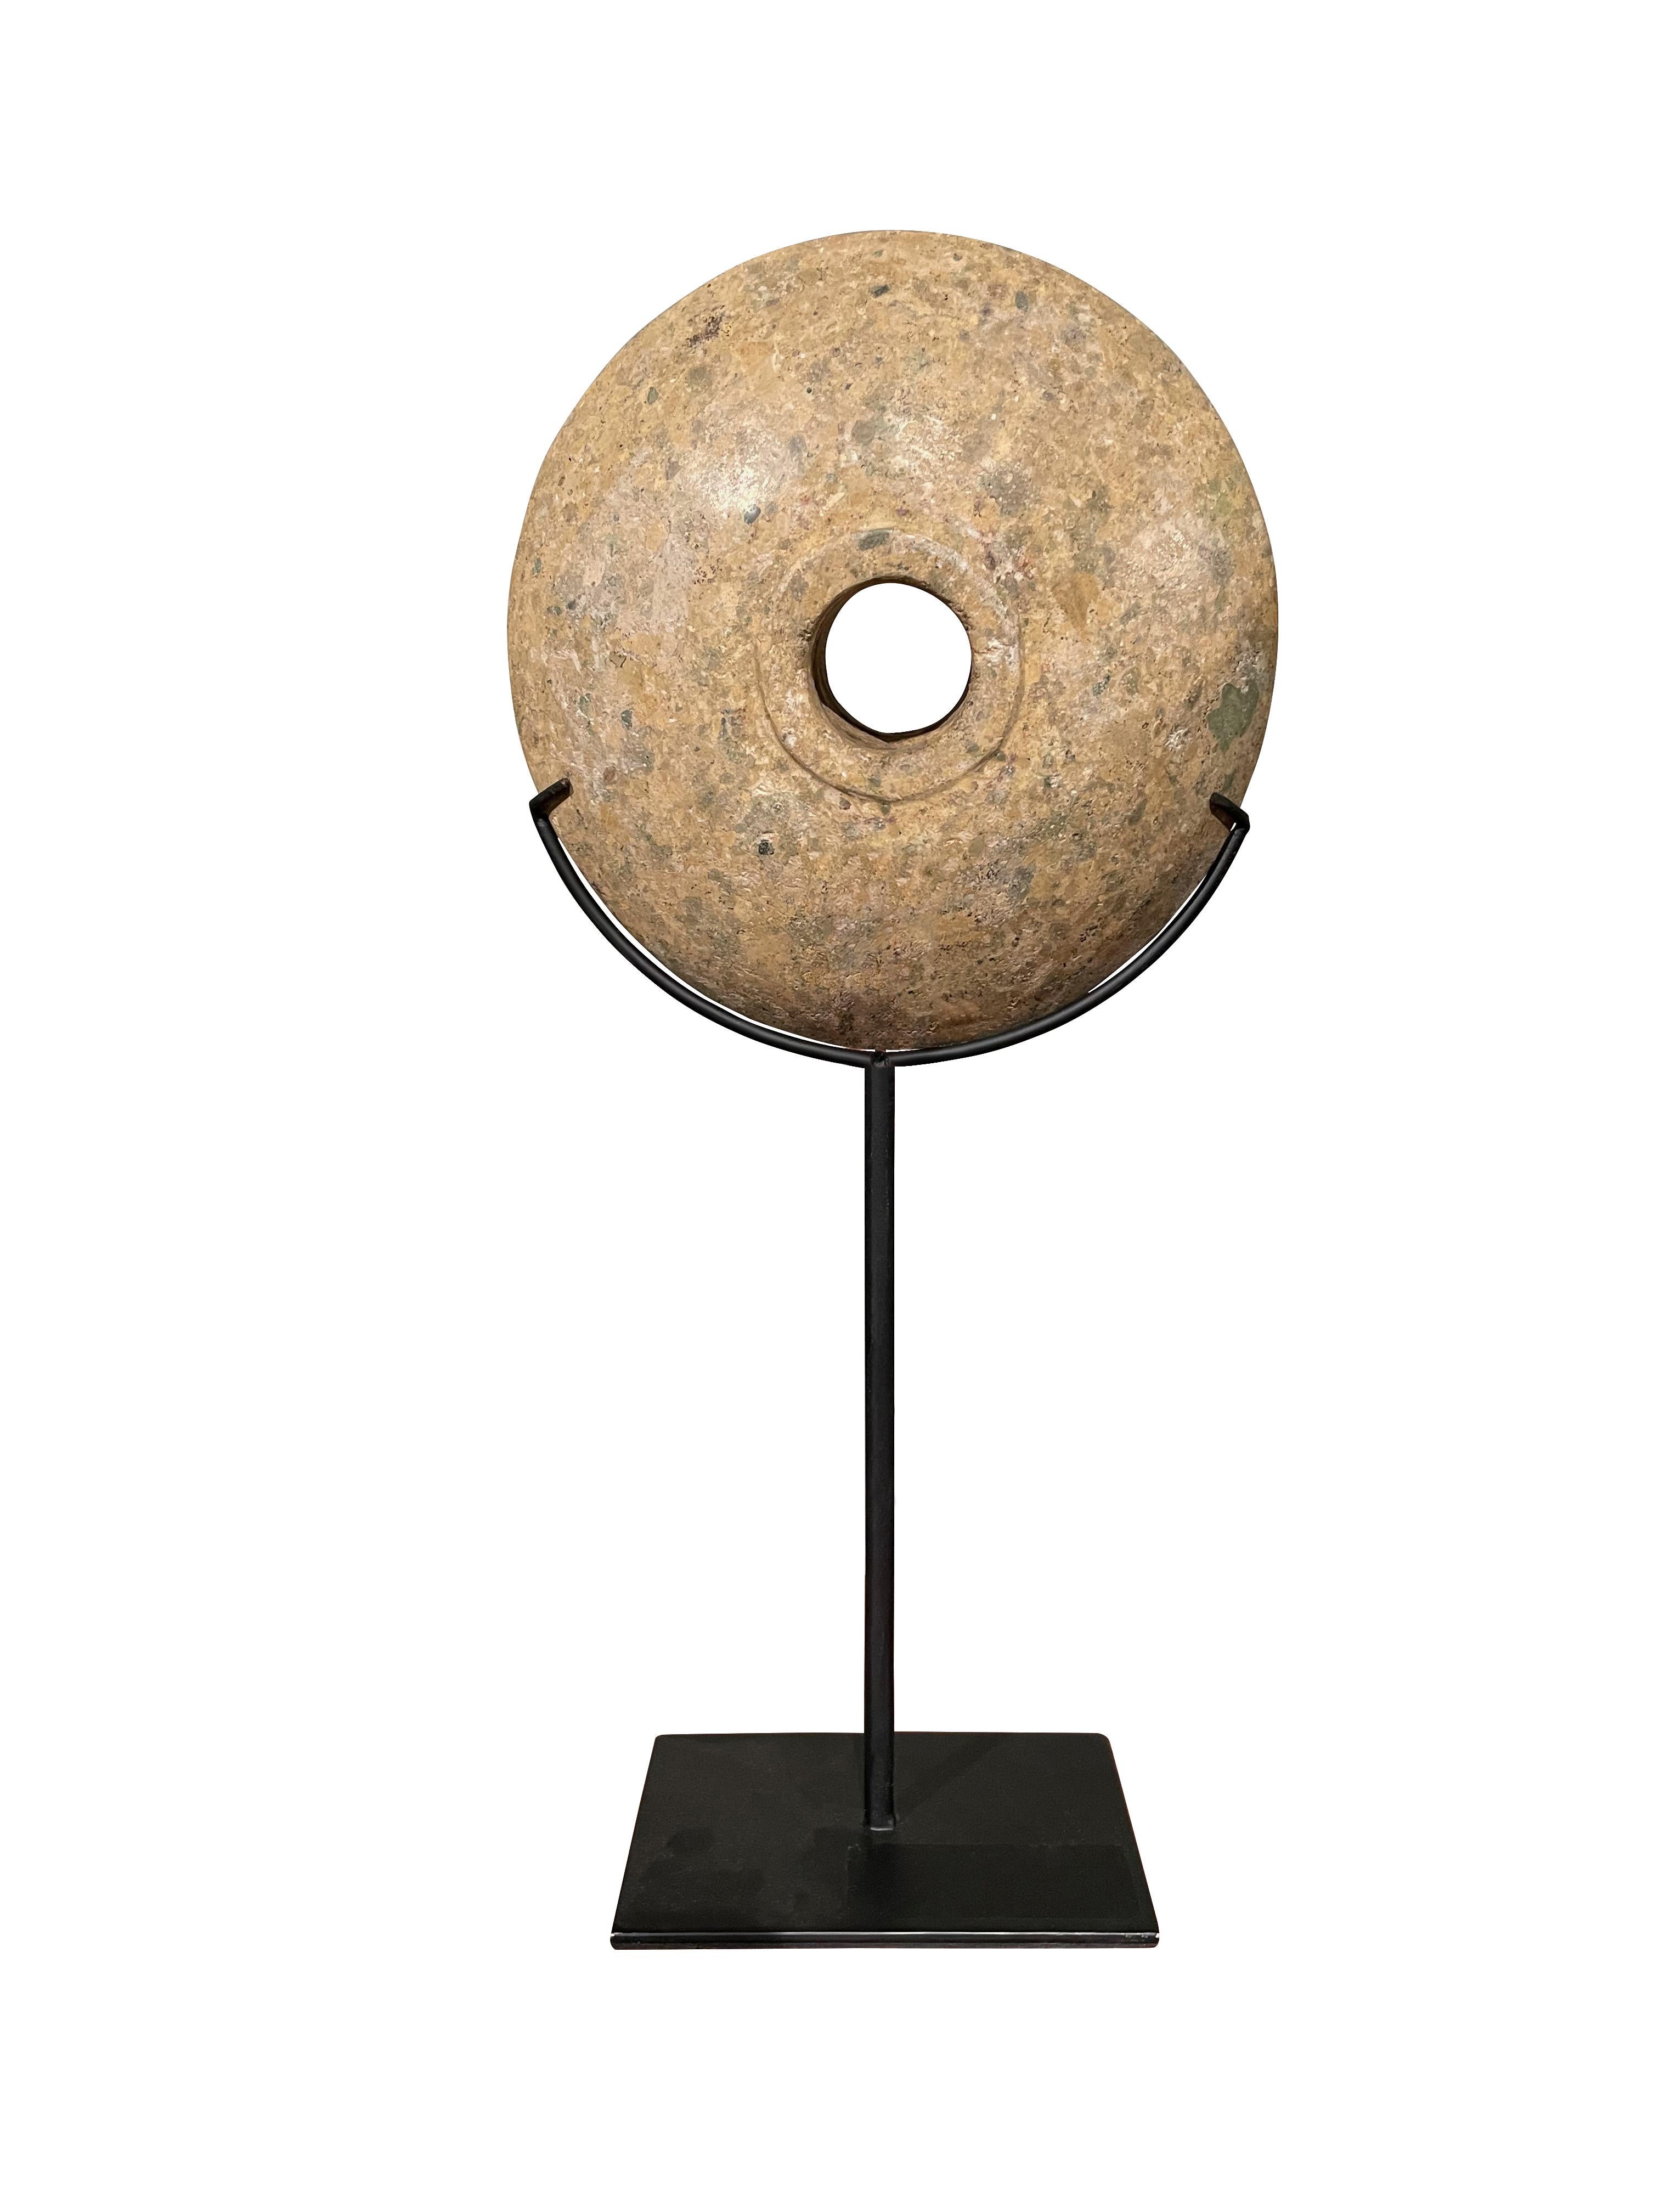 Contemporary Chinese set of two stone discs on metal stands.
Honed and smooth finish.
One stone measures 6